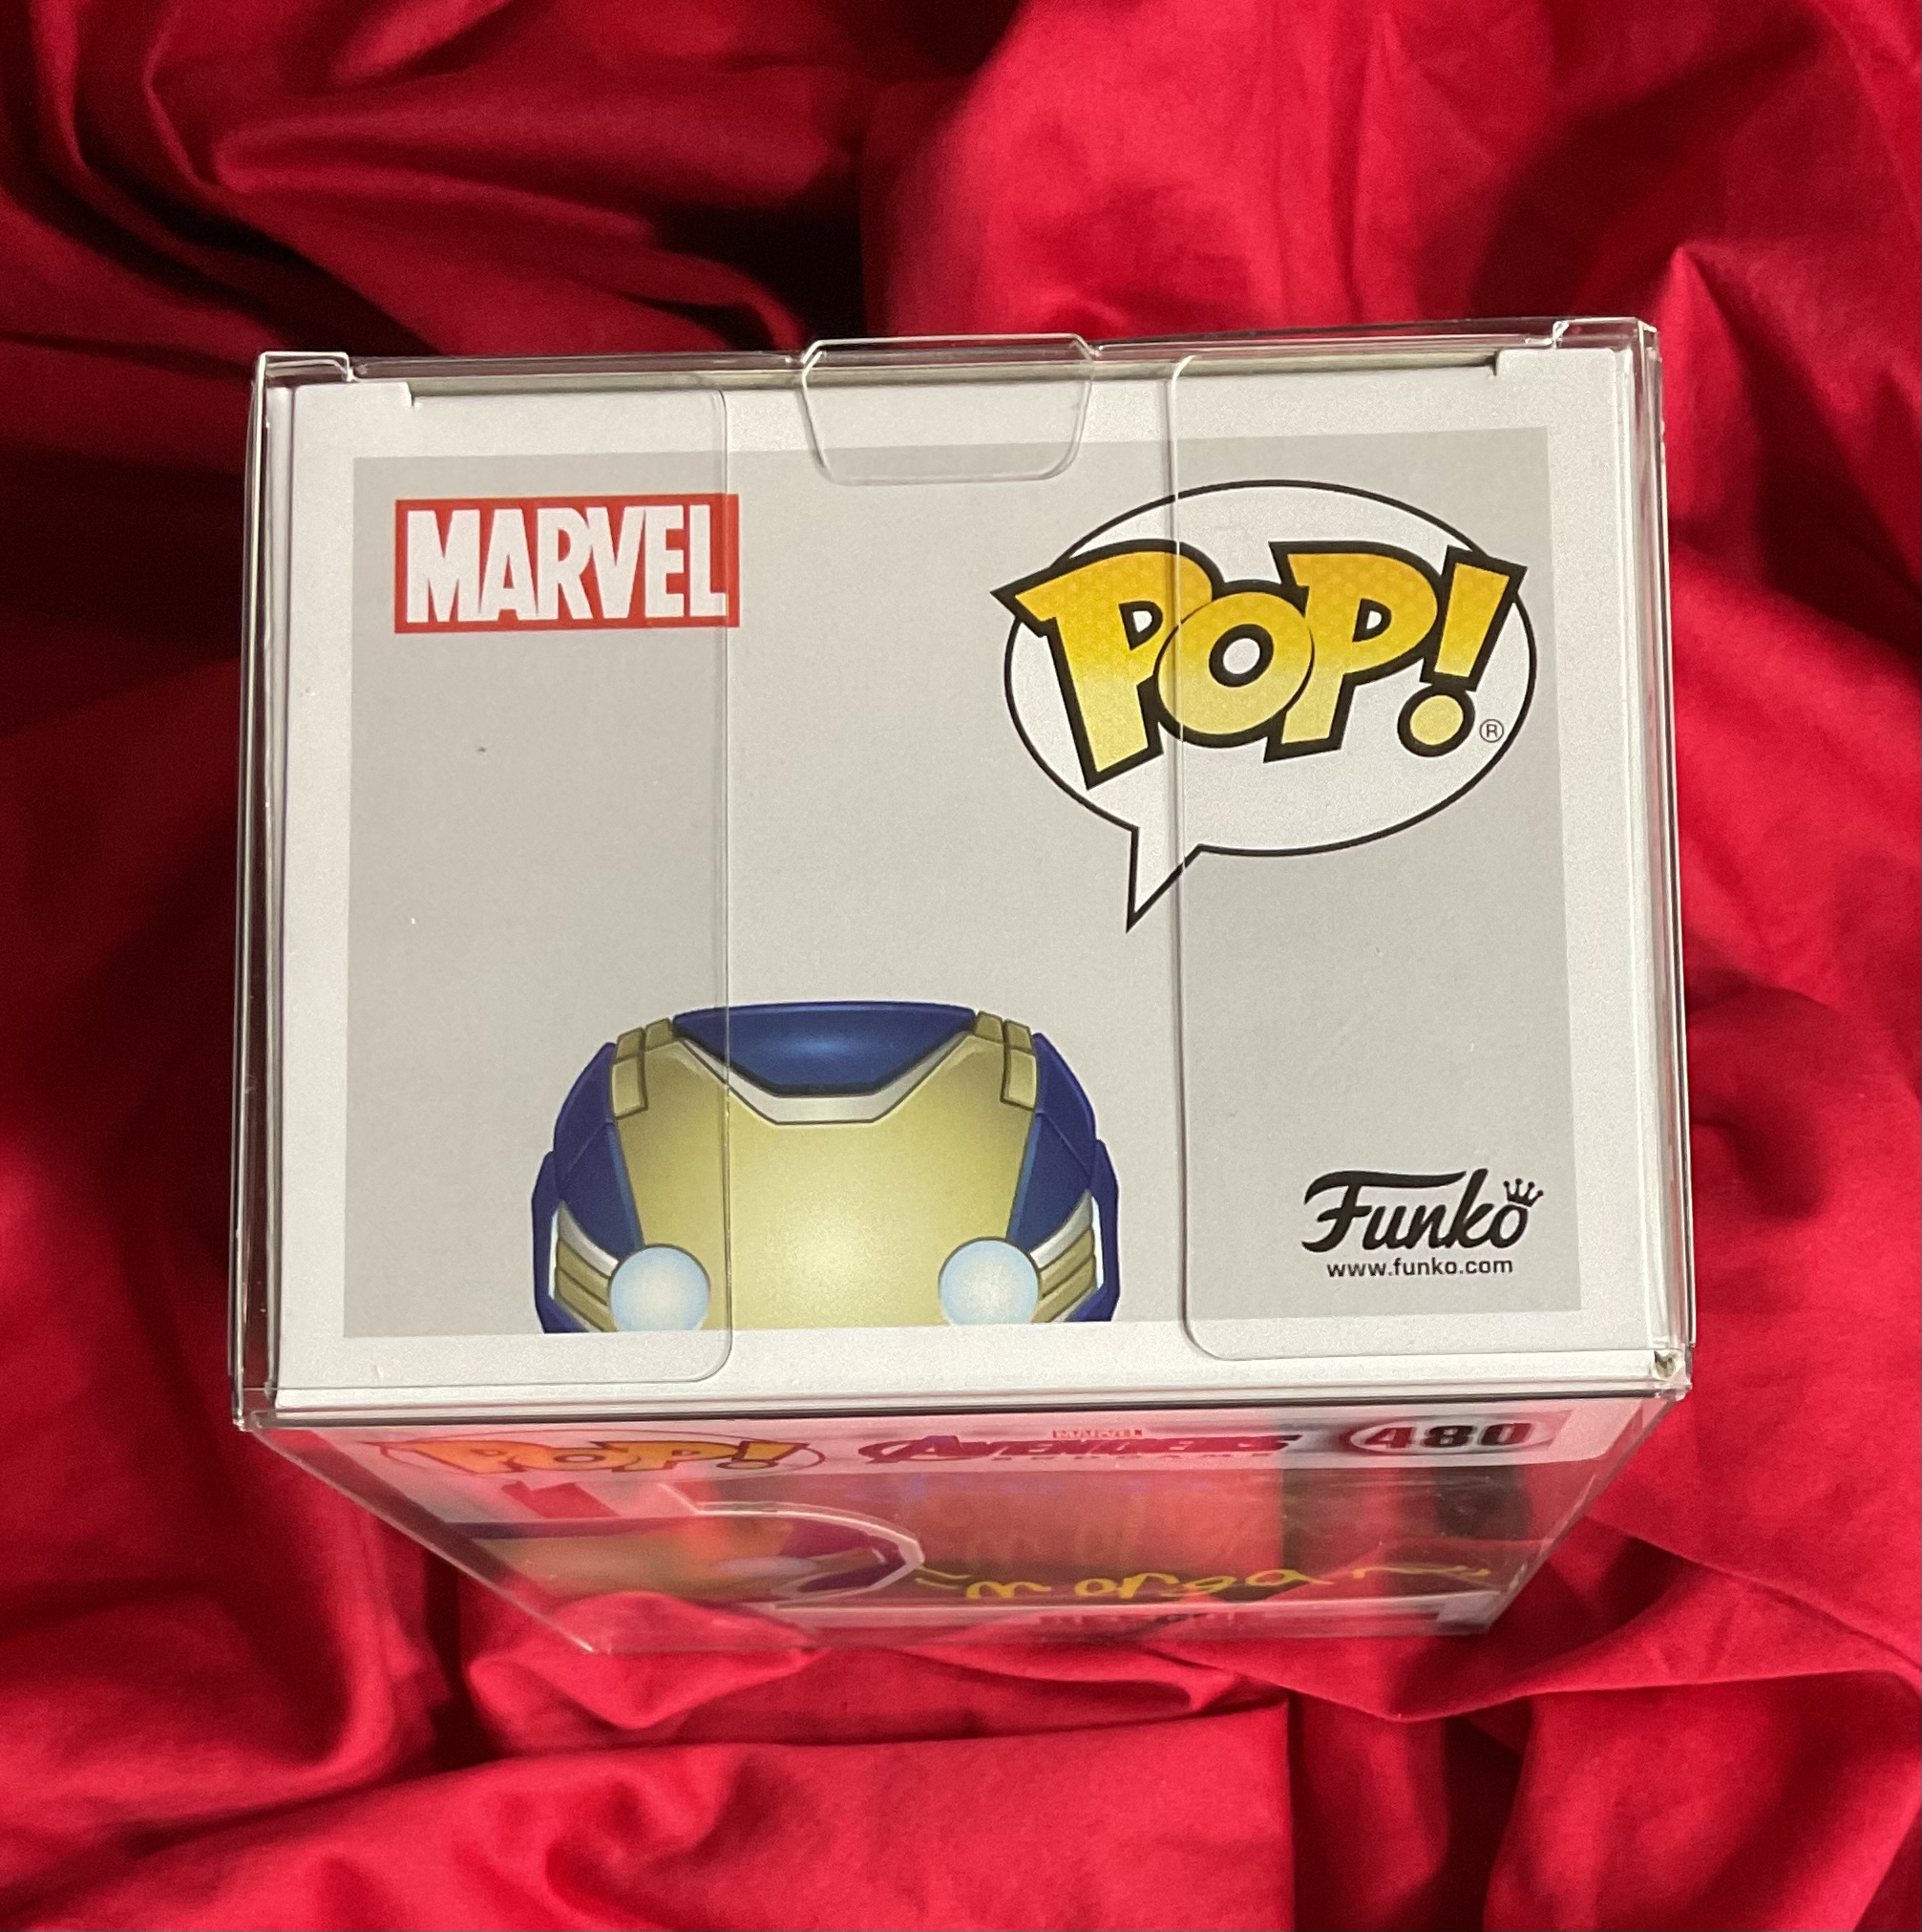 Avengers Endgame~Rescue~Funko Pop #480~Signed by Lexi Rabe with “Morgan ...